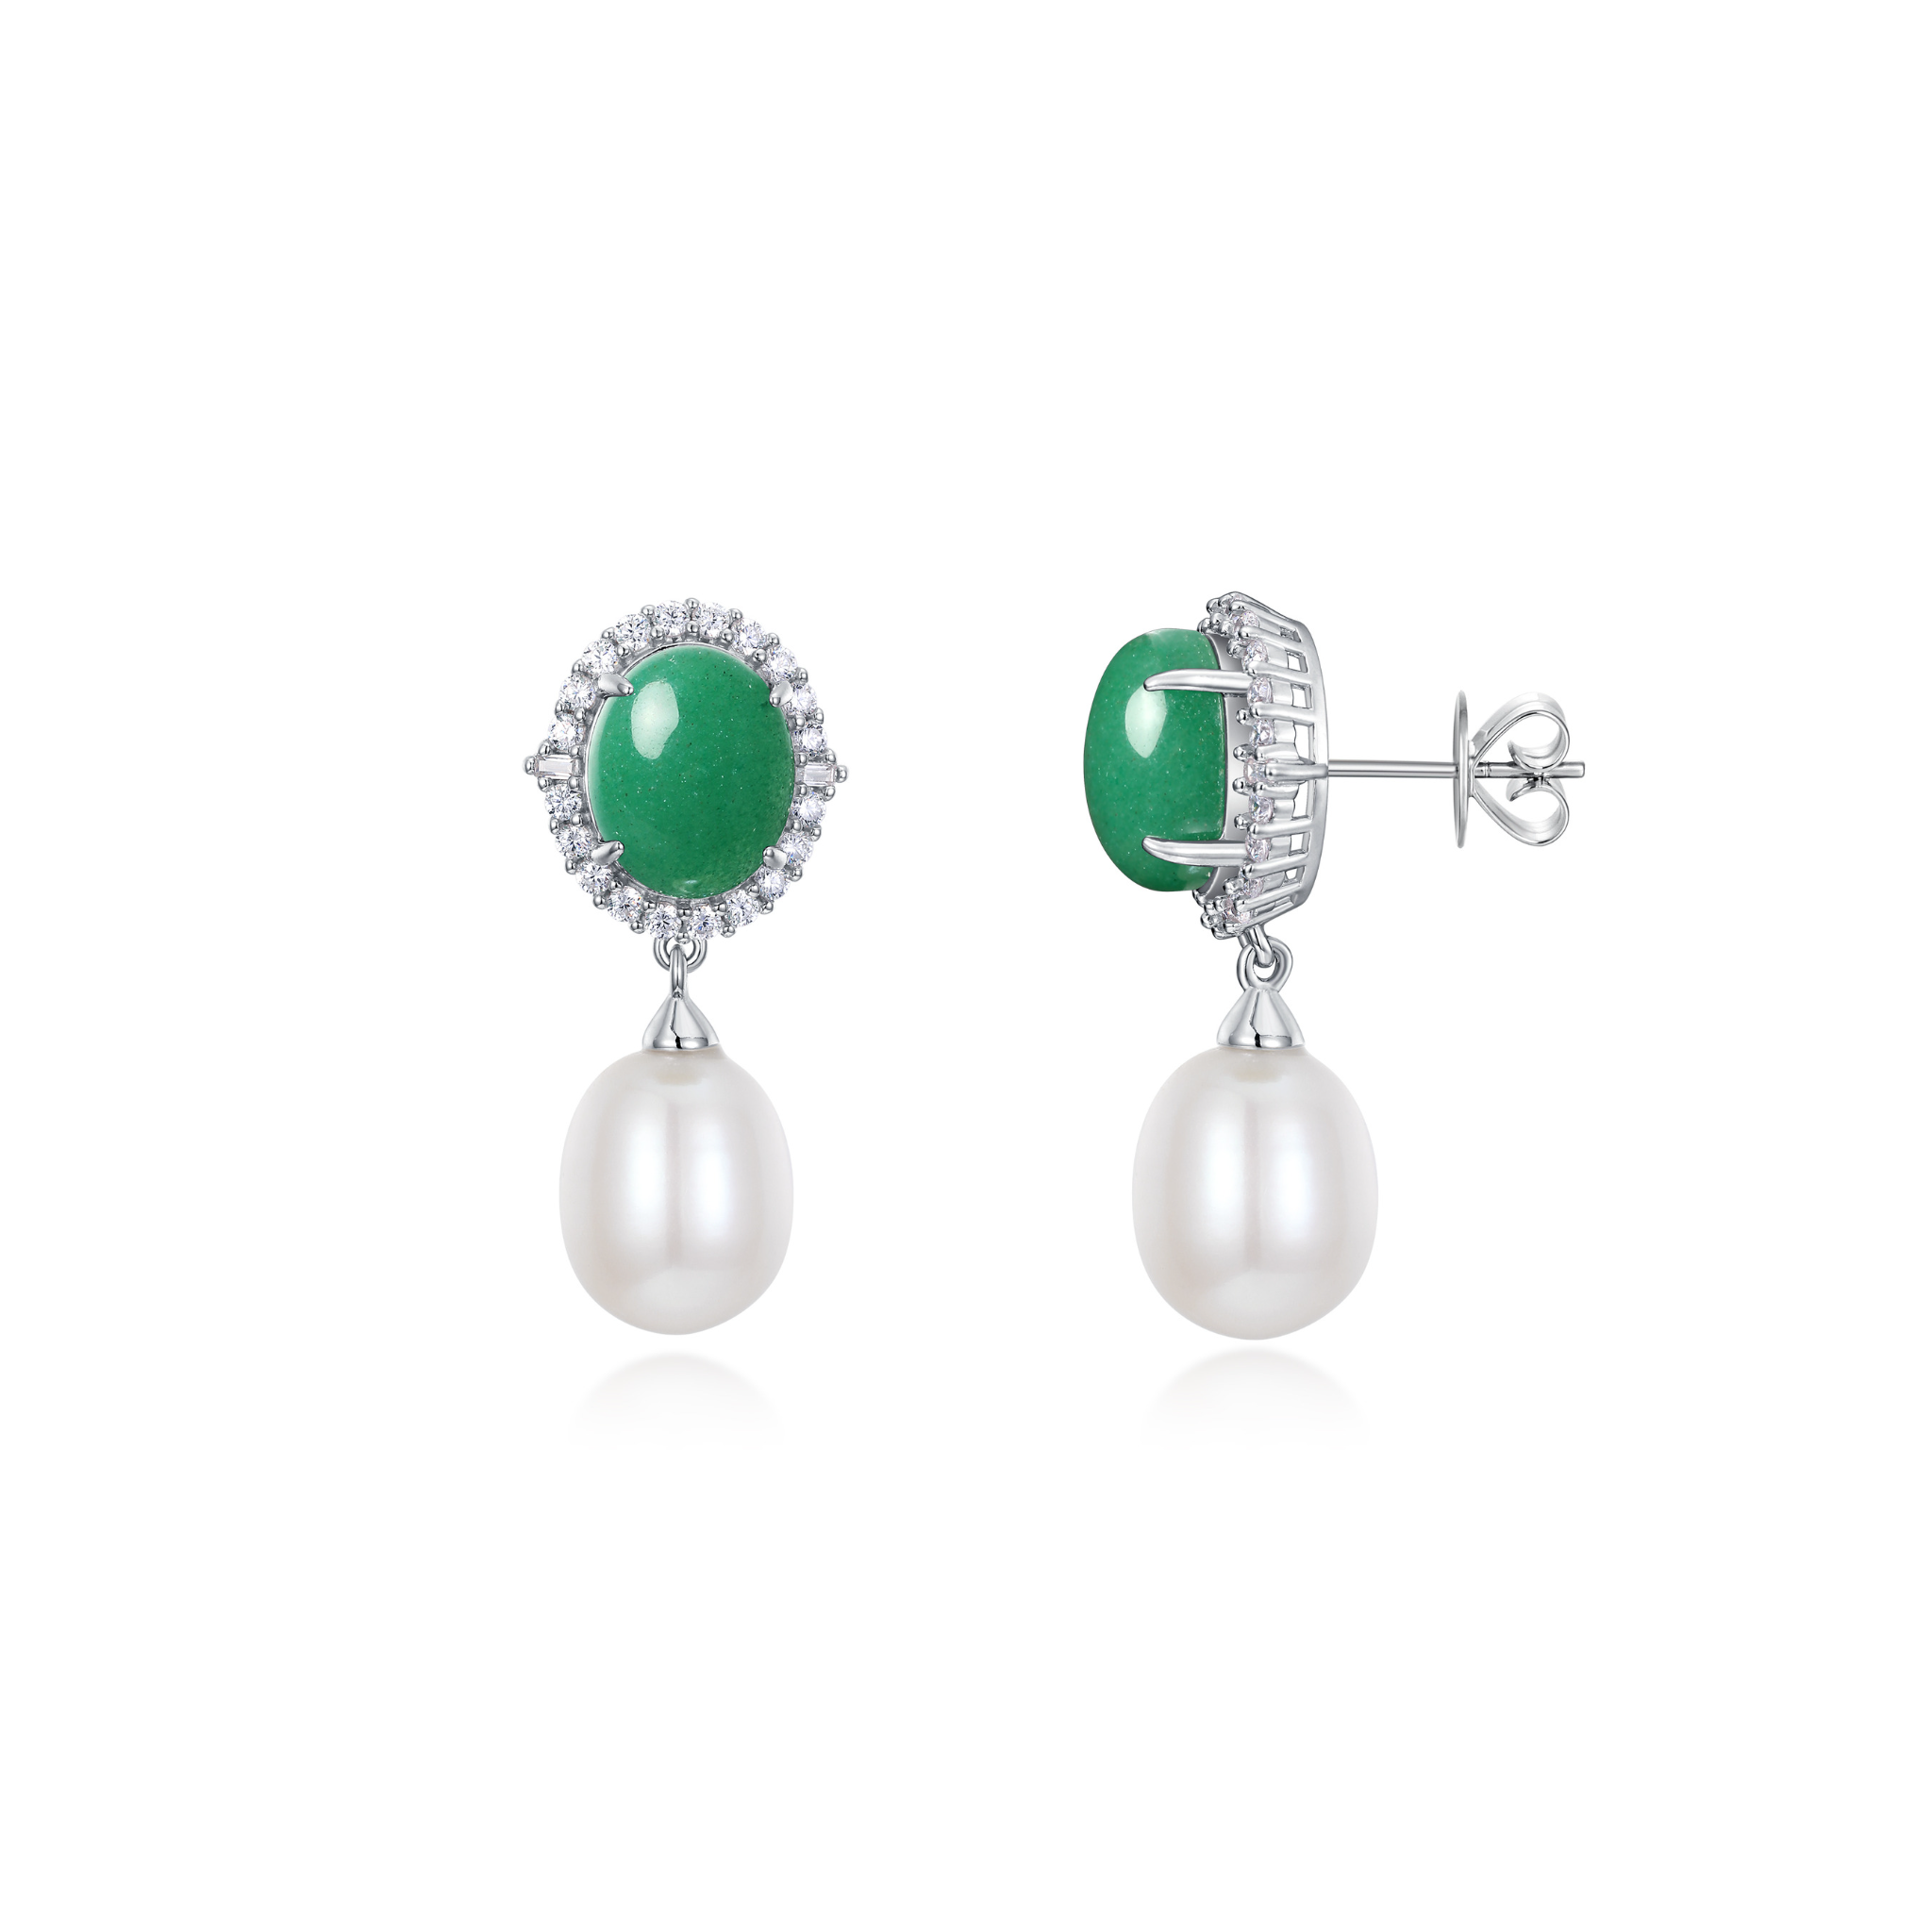 PEARL DROP AND AVENTURINE EARRINGS - L'Amour Pearls